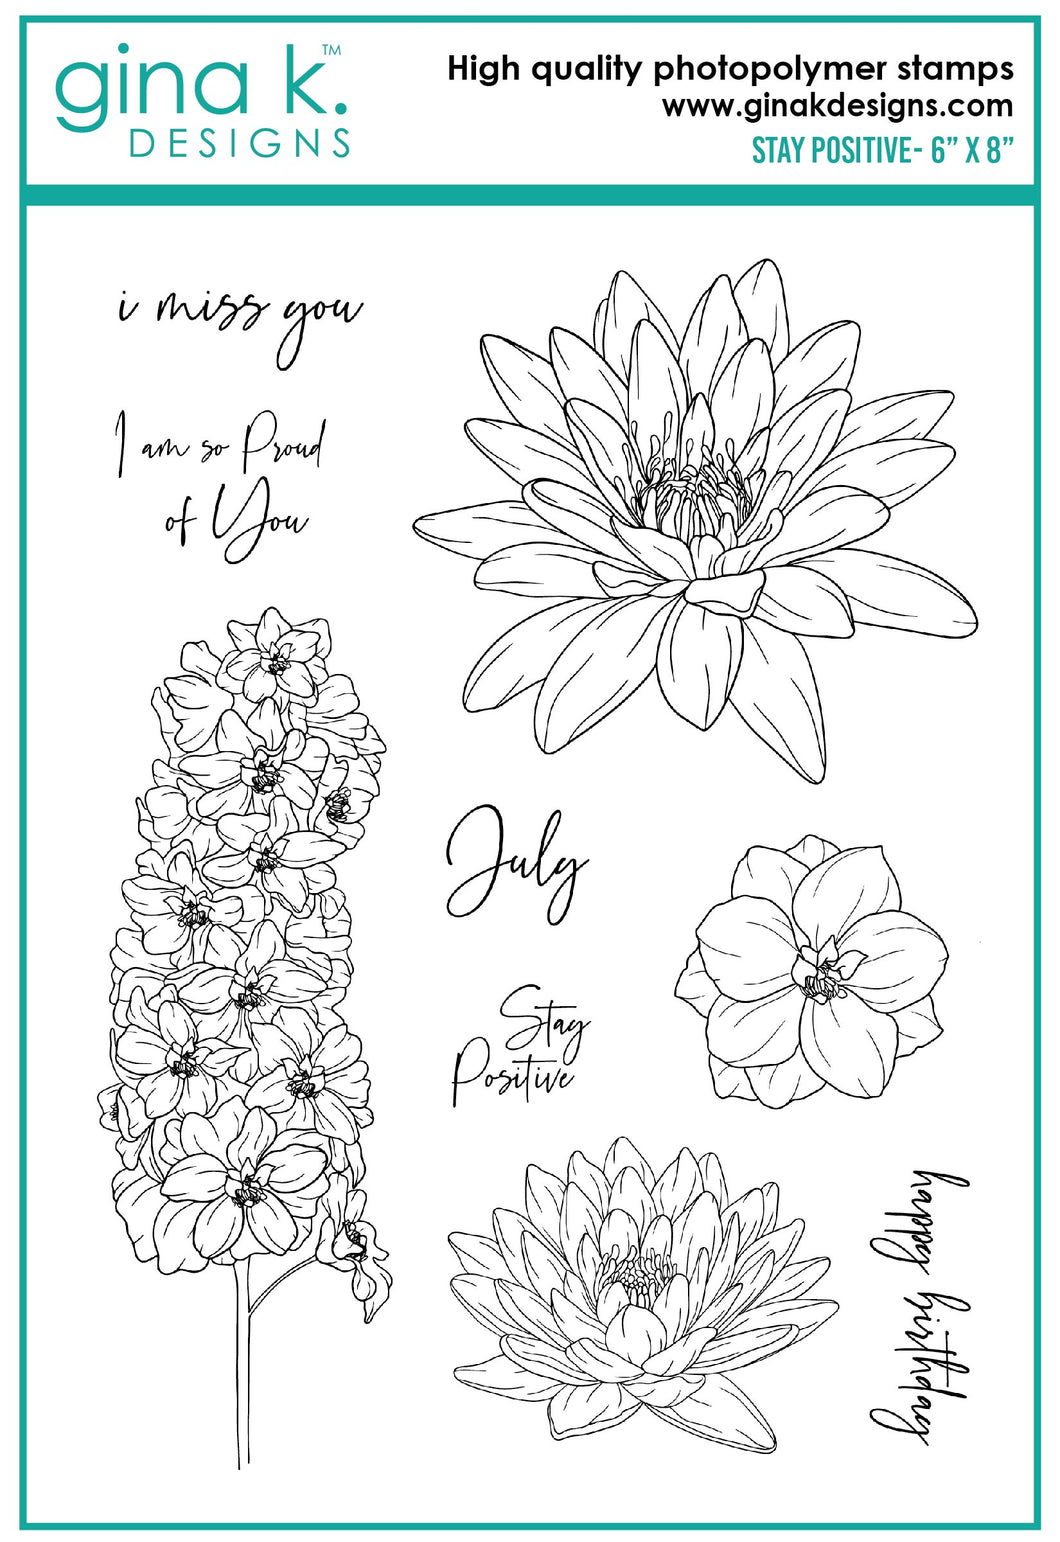 Gina K. Designs - Stamps - Stay Positive. Stay Positive is a stamp set by Hannah Drapinski. This set is made of premium clear photopolymer and measures 6